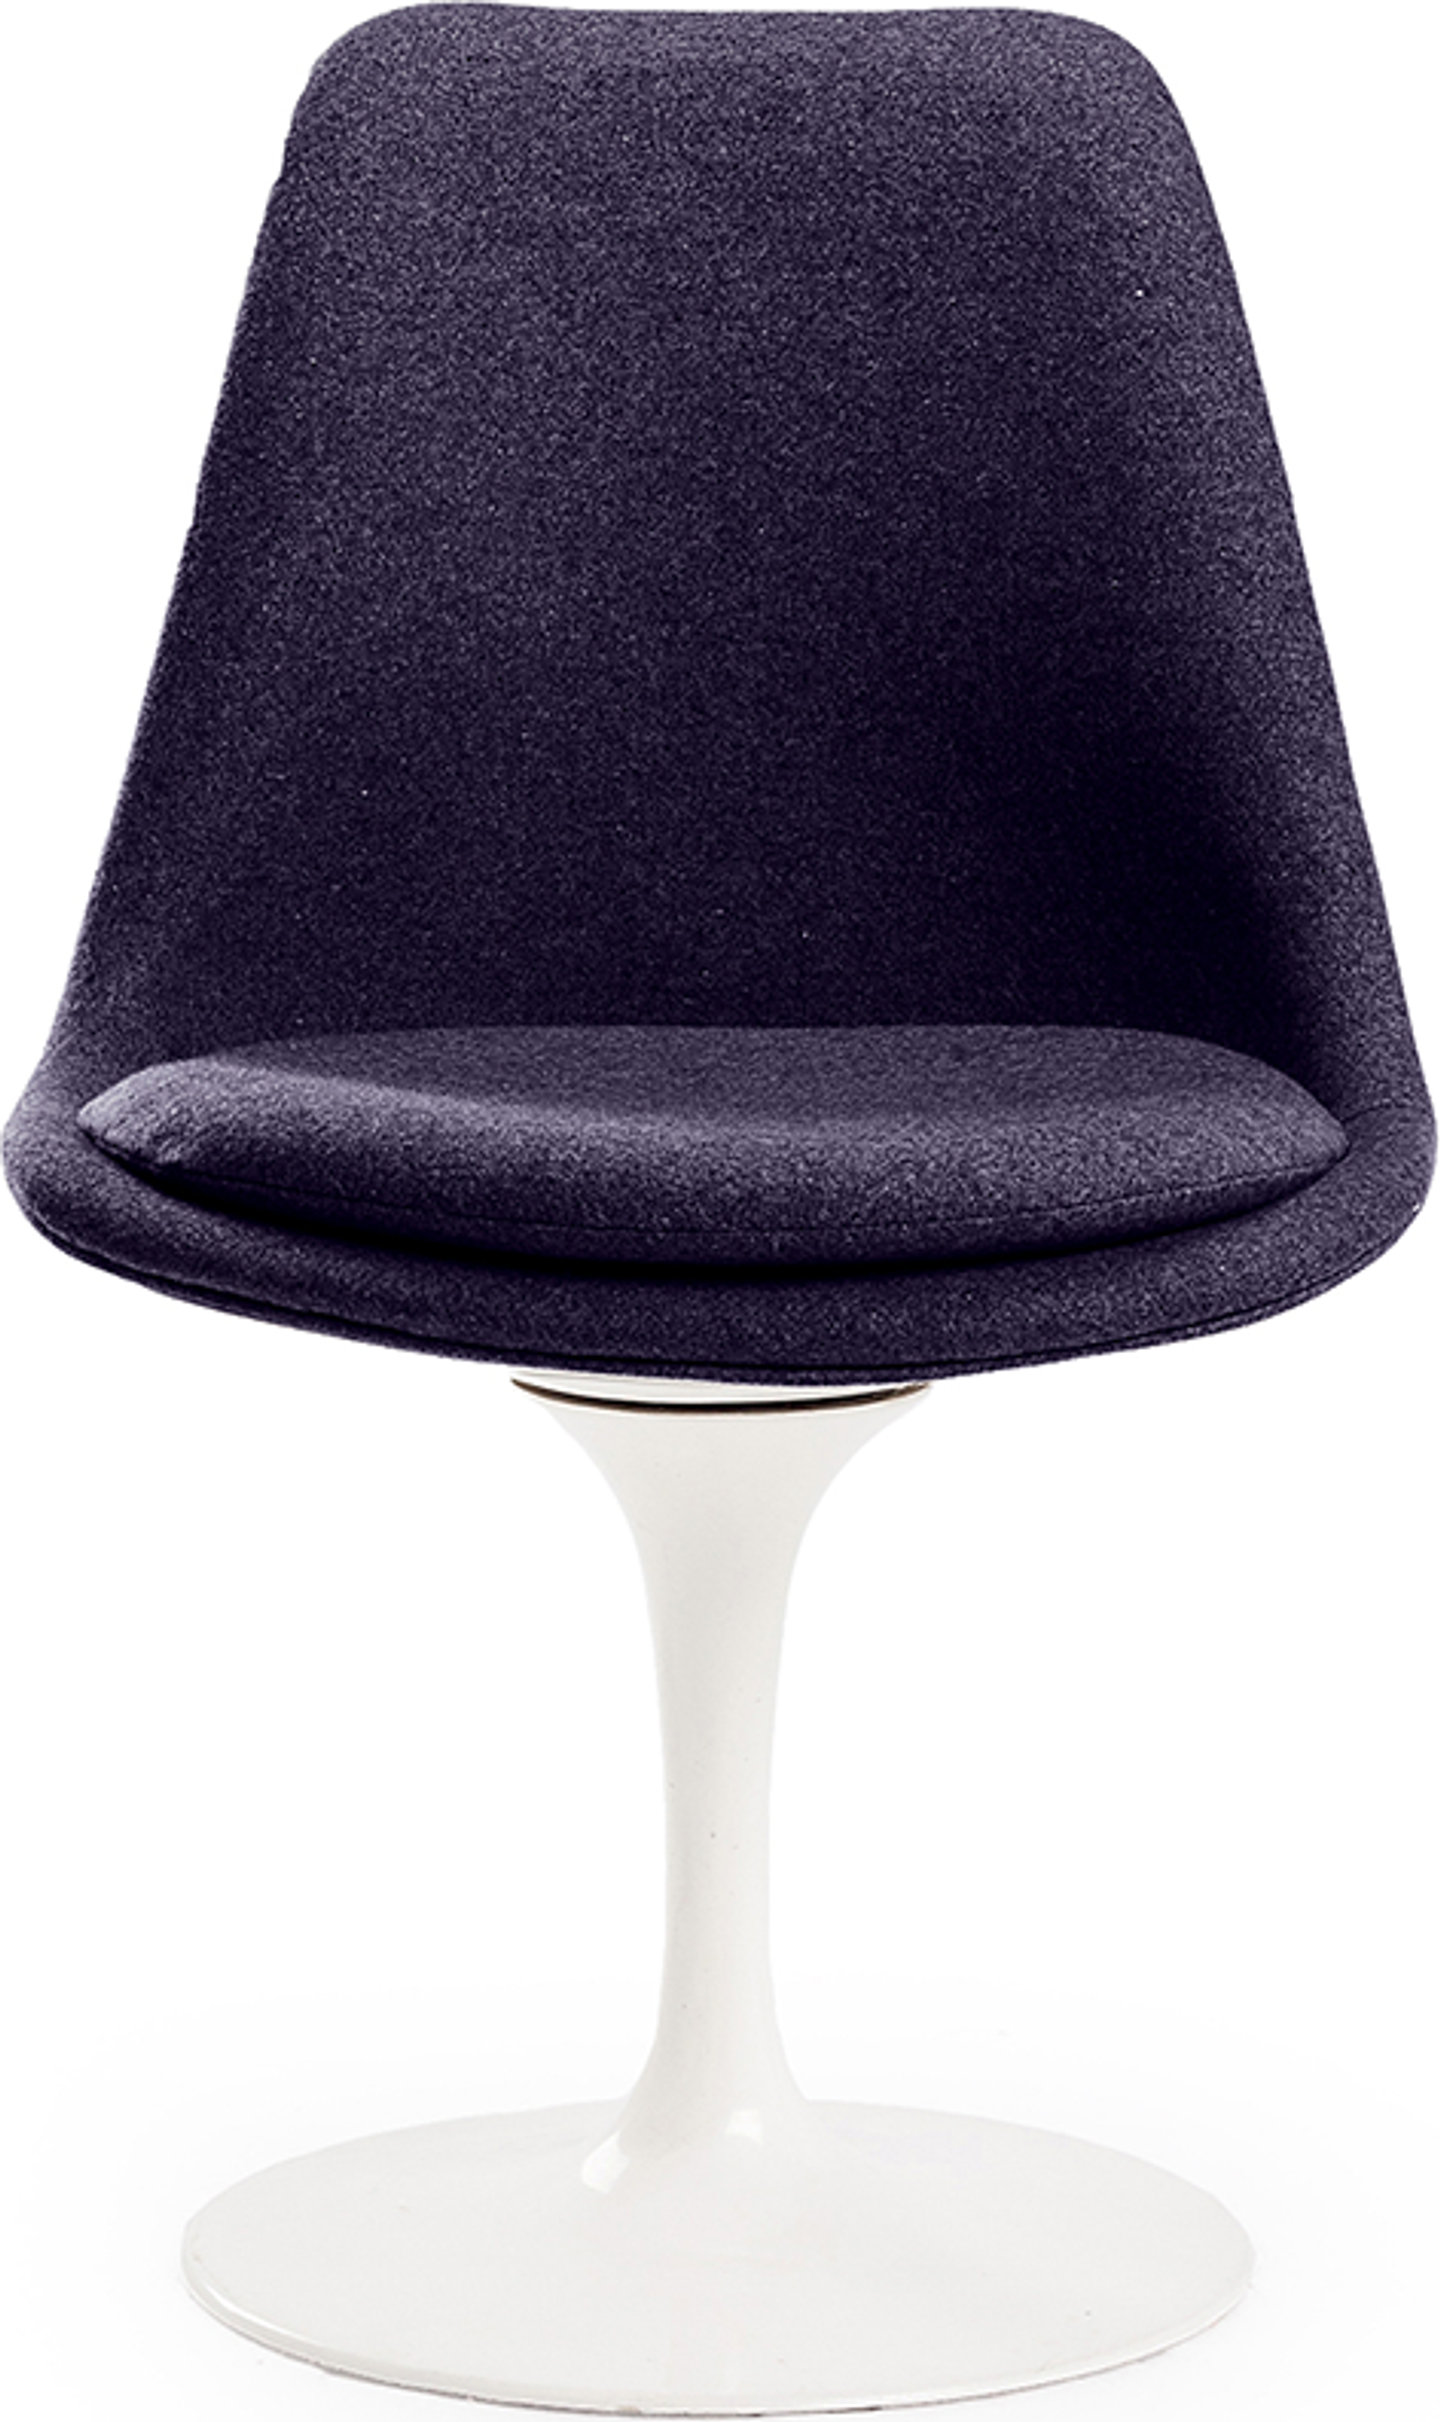 Tulip Chair Upholstered Black image.